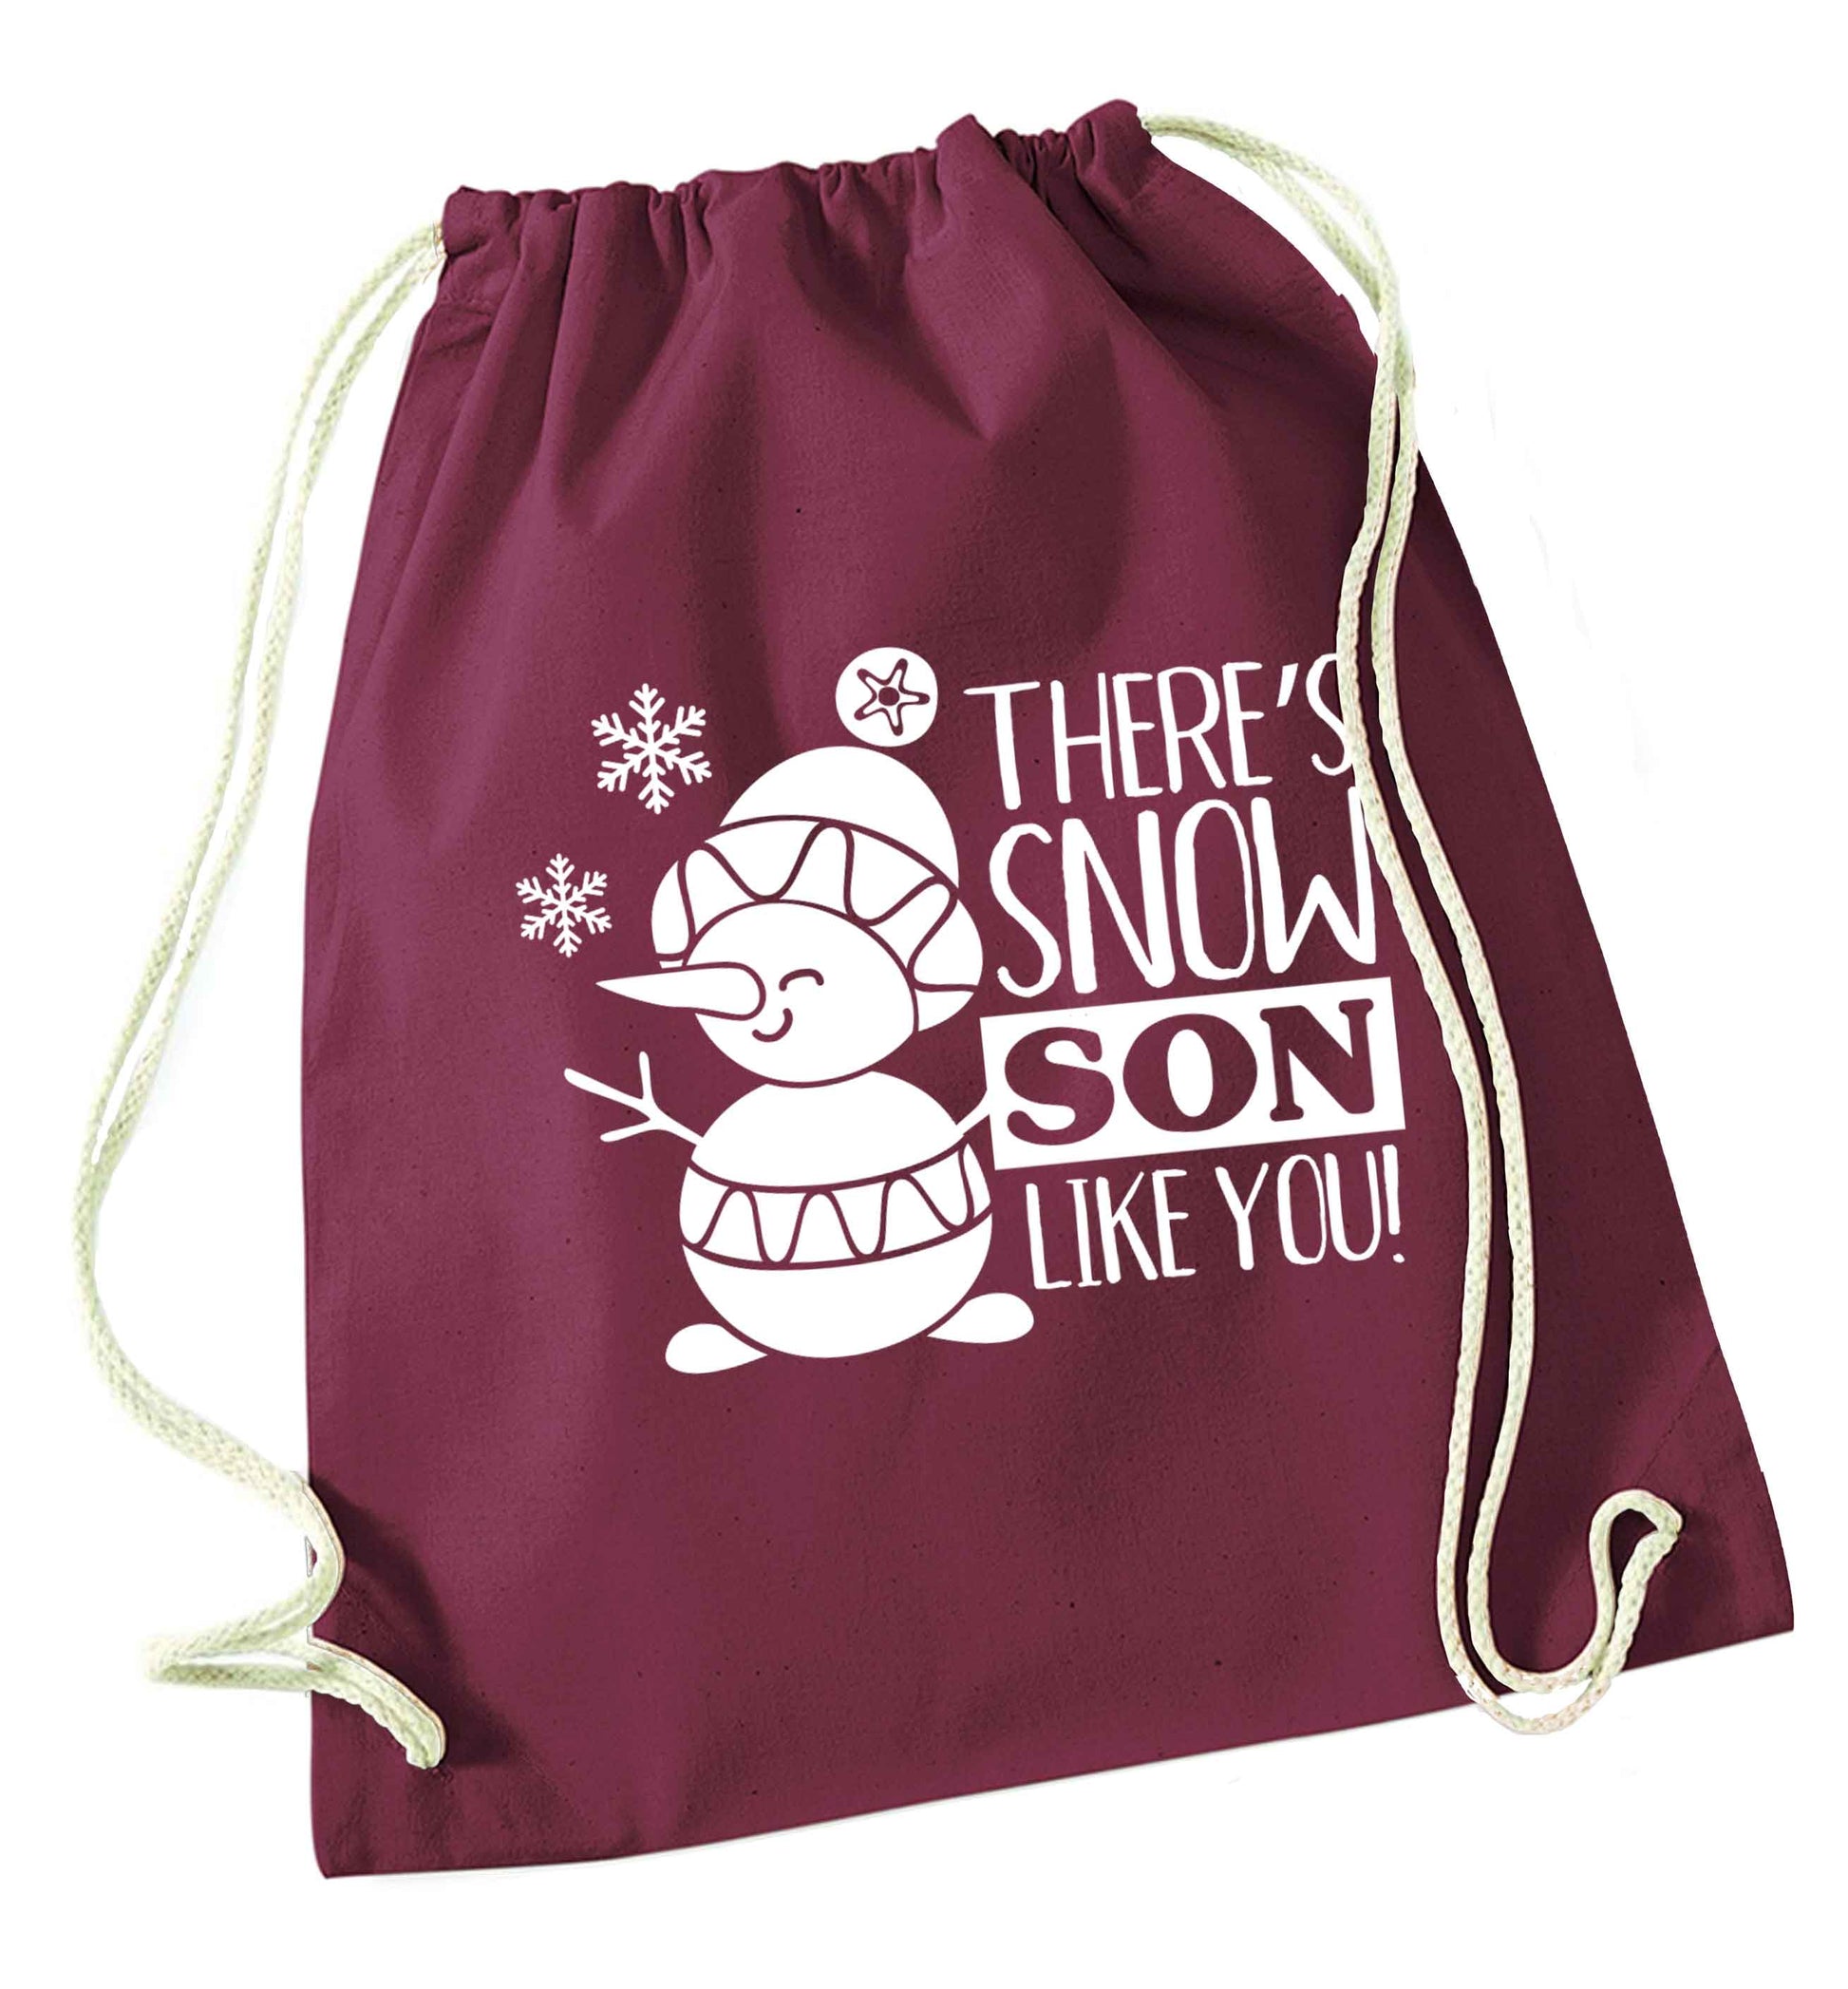 There's snow son like you maroon drawstring bag